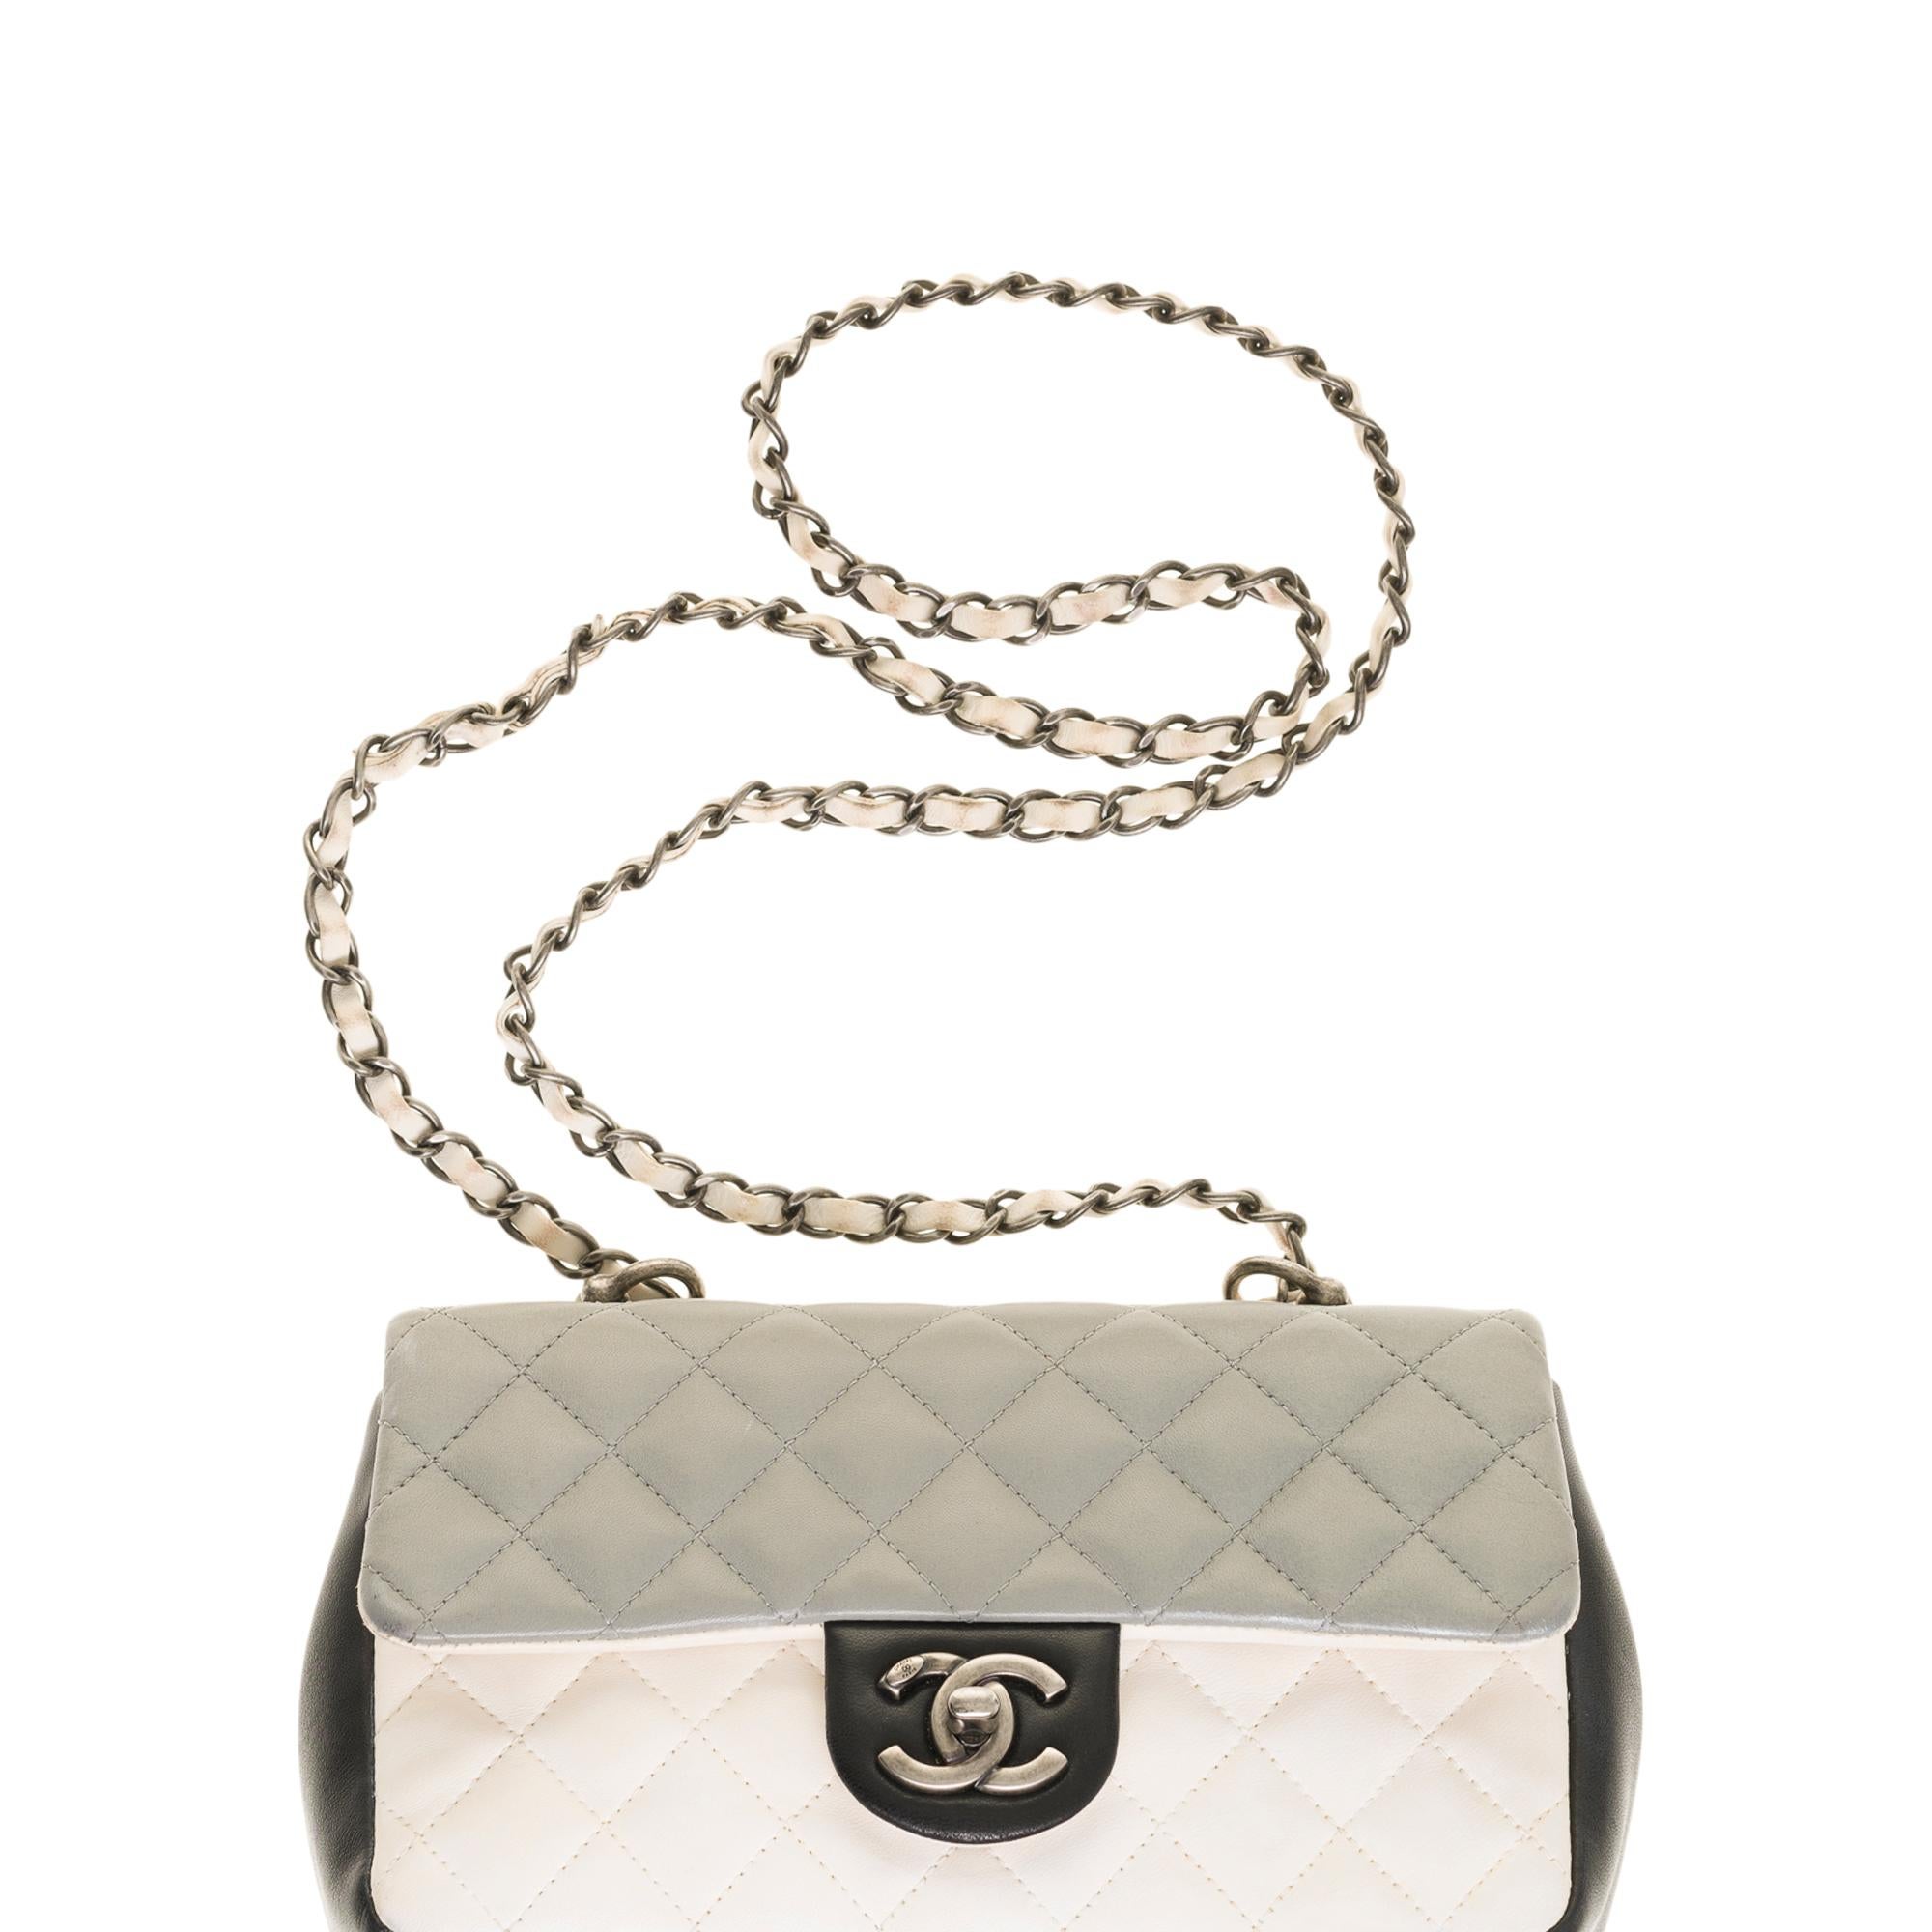 Chanel Classic single Flap shoulder bag in grey/black/white quilted lambskin, SHW 3